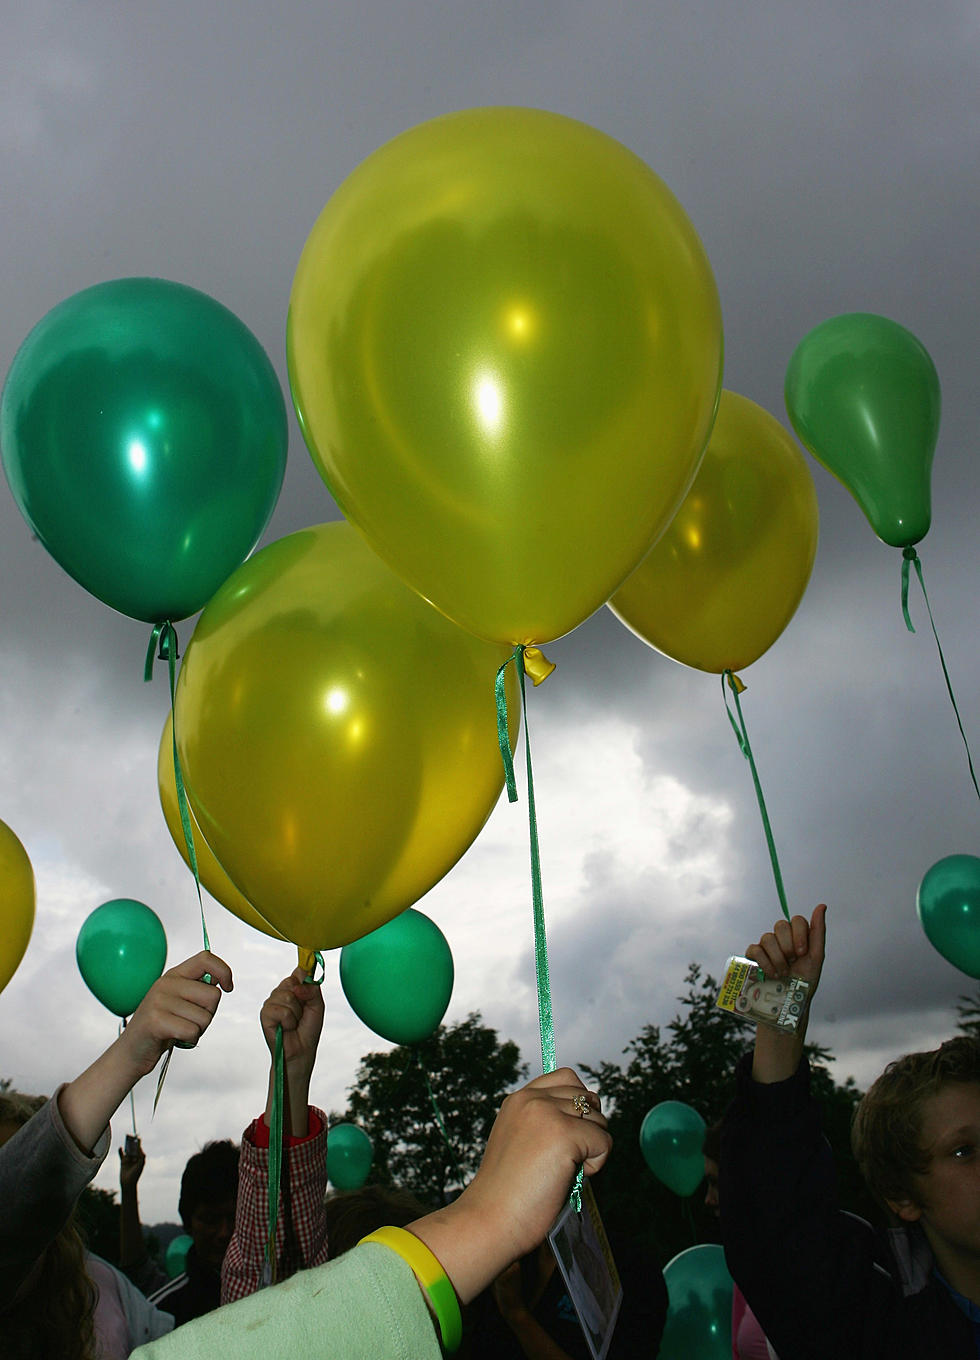 Balloon Release September 13th To Remember Lost Pets